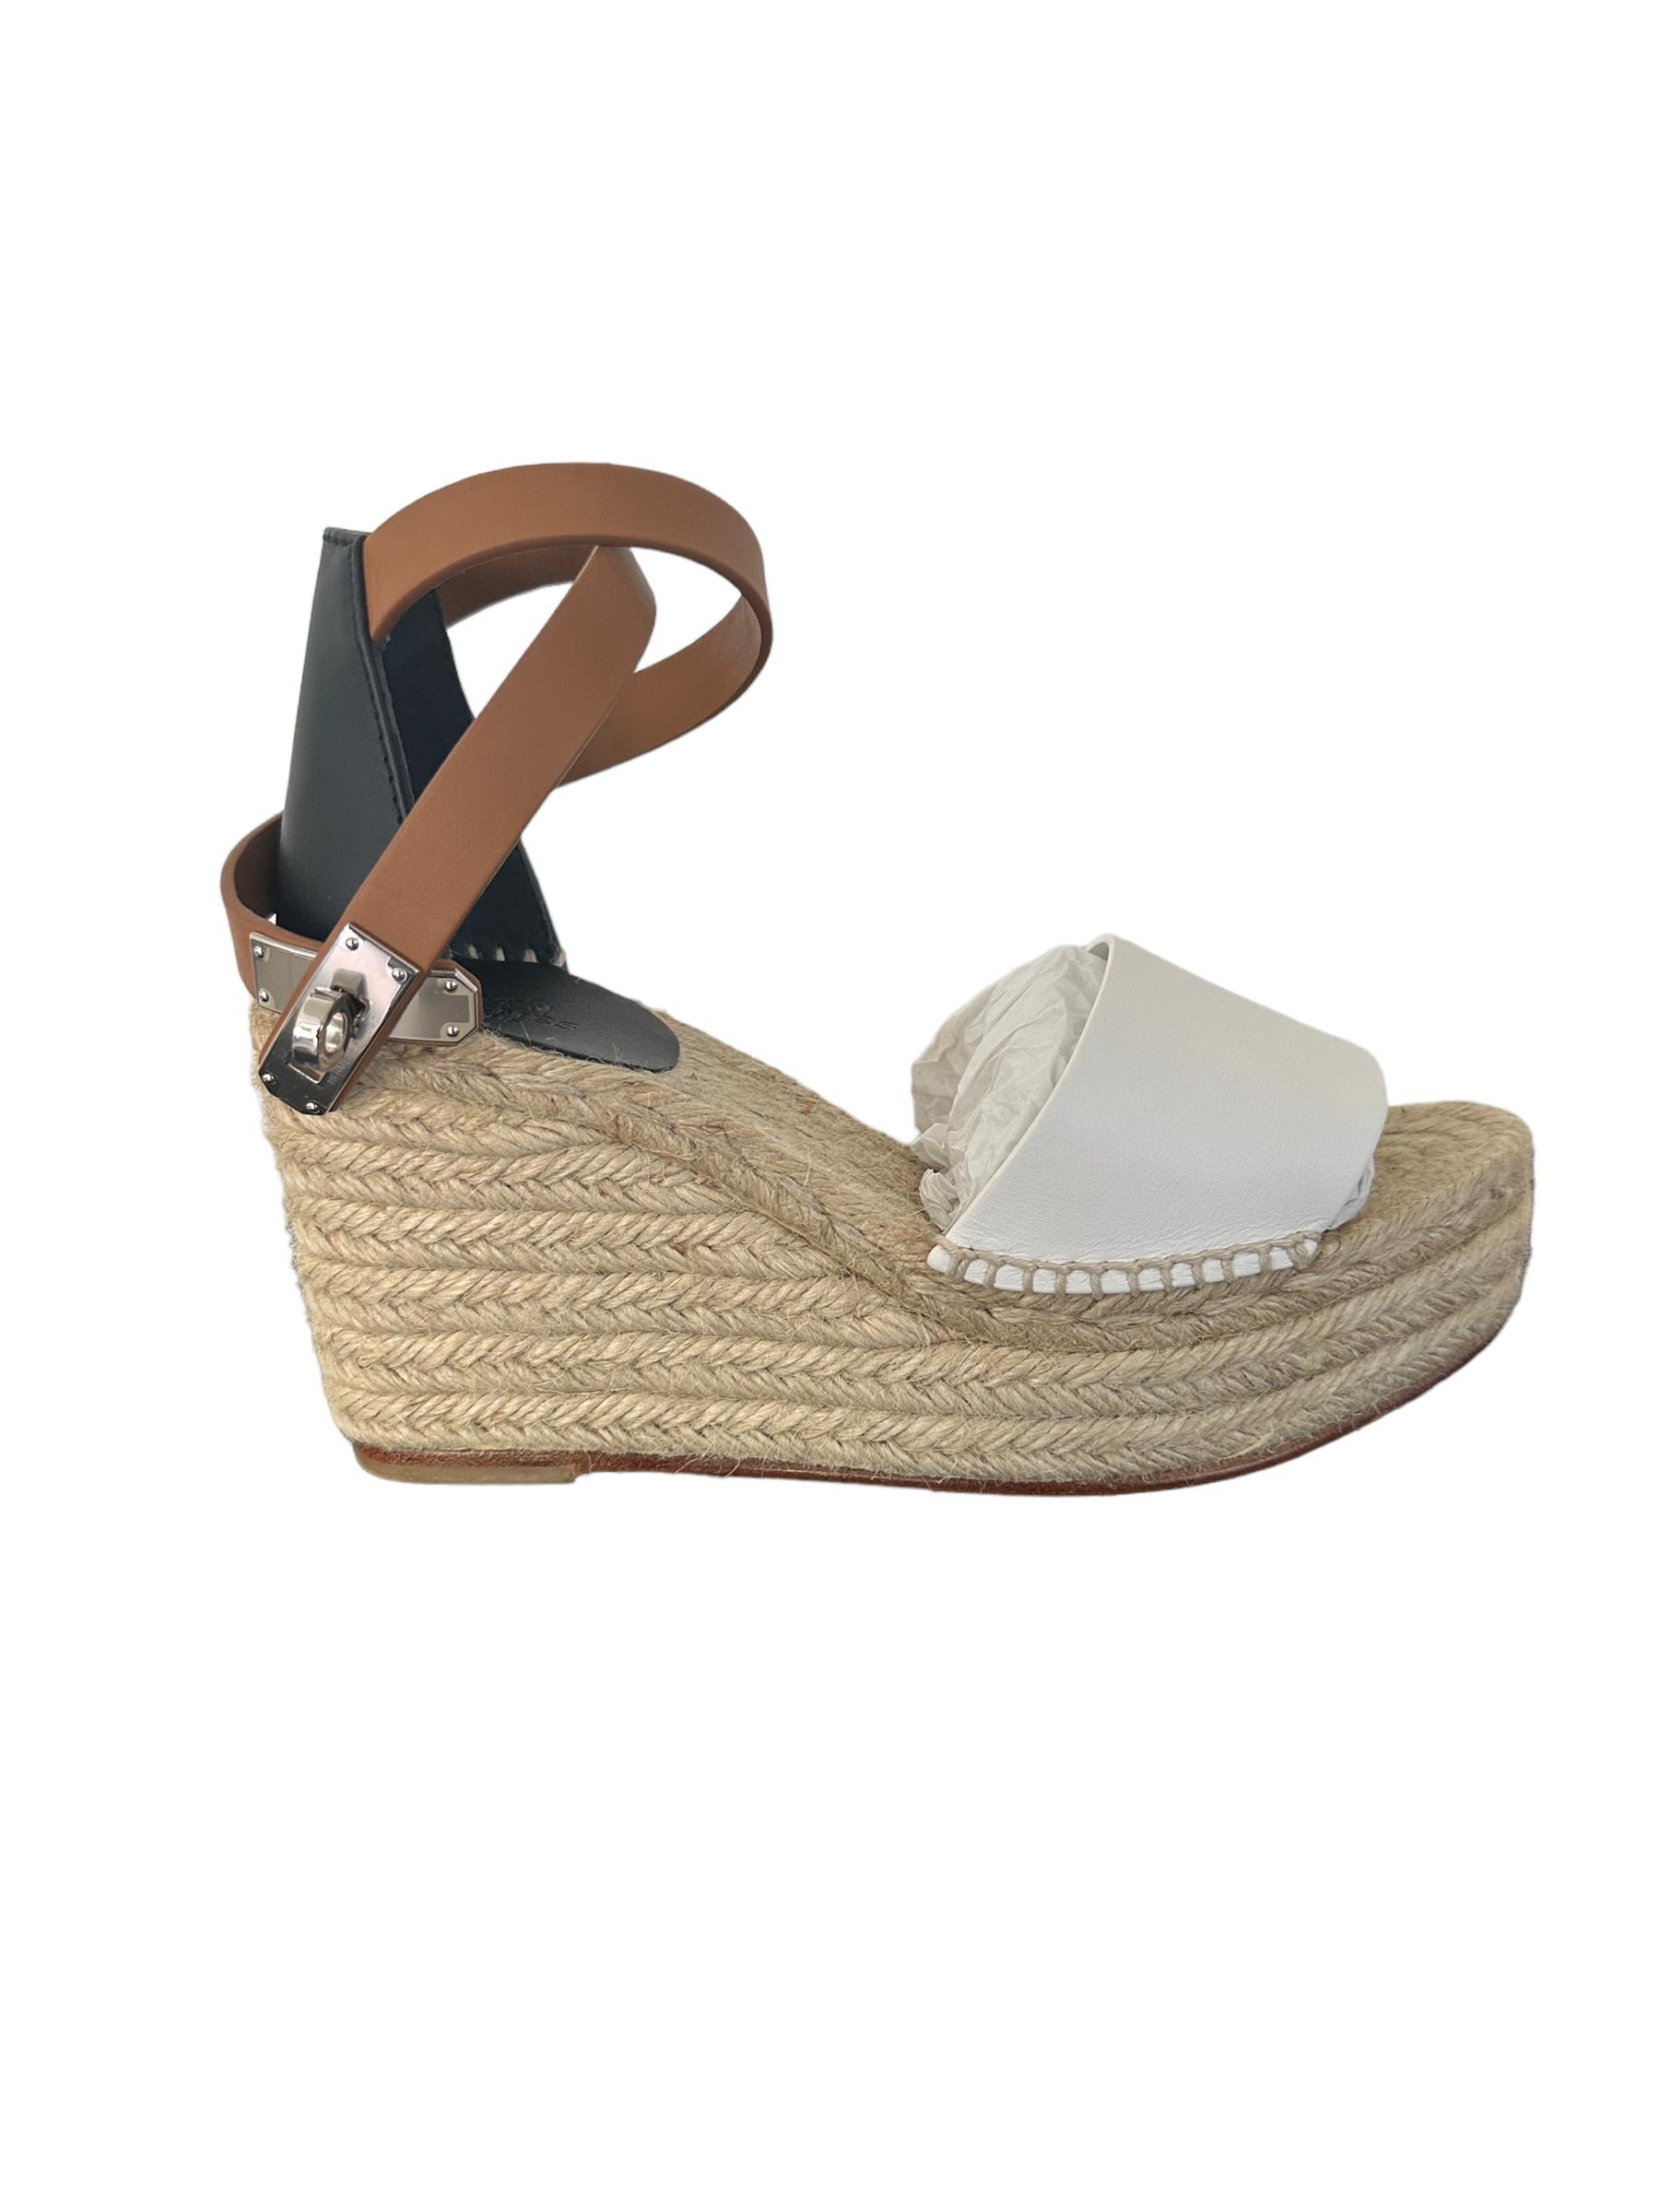 Hermes Tipoli Wedge with Kelly Buckle
Palladium plated buckle 
Size 35
Soldout immediatly
We have only this one pair left in stock
Espadrille in suede goatskin with iconic buckle, wedge heel and wrap-around ankle strap
The Iconic Kelly Lock Buckle